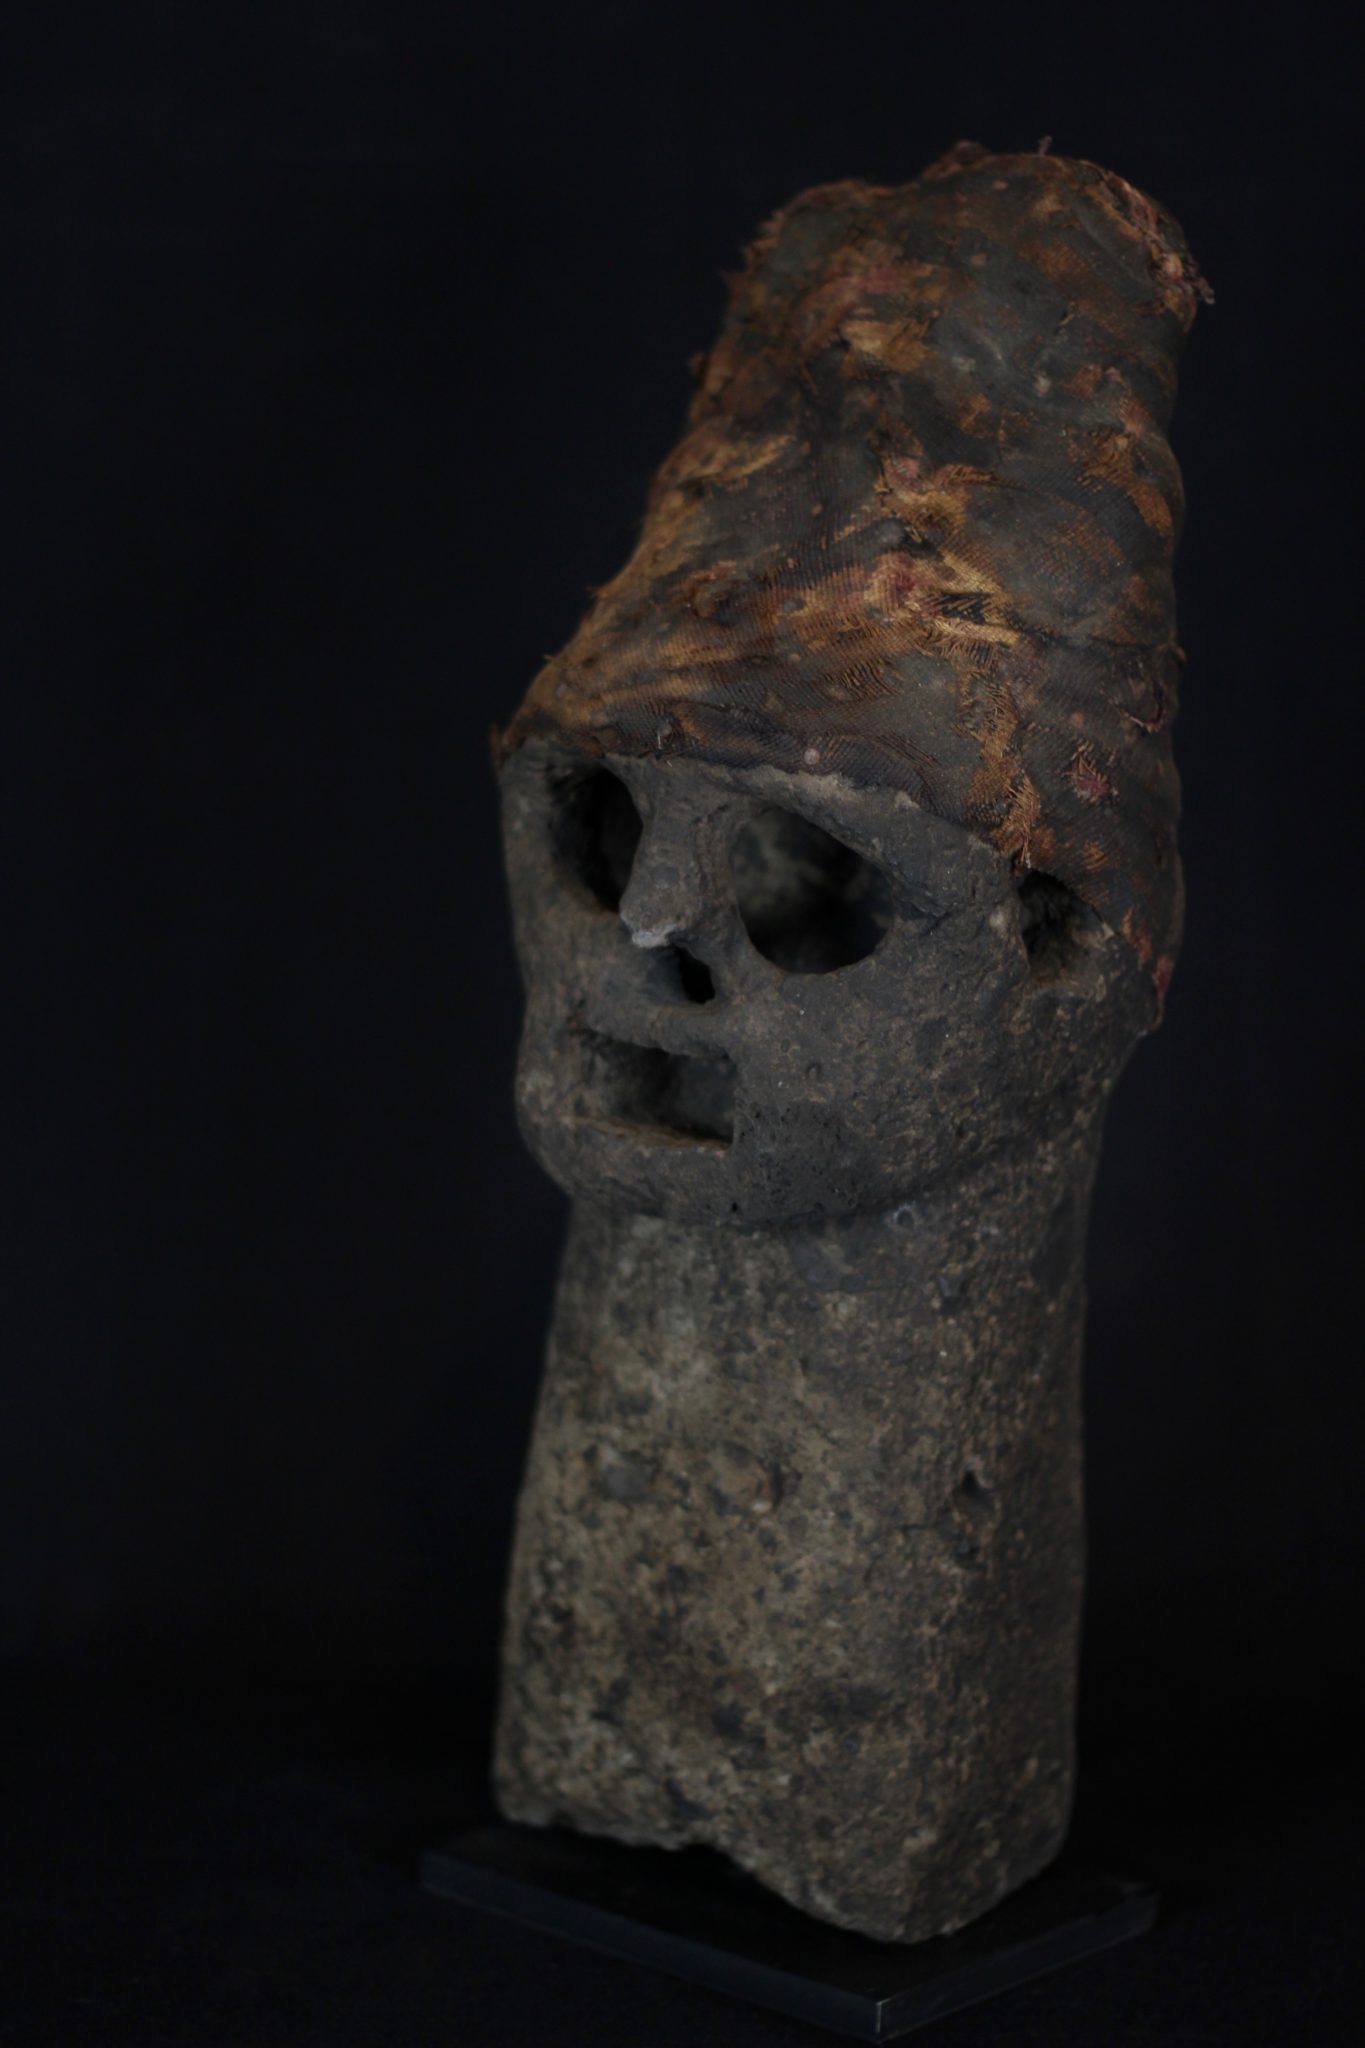 Volcano God Effigy (exceptionally rare), Flores Island, Lesser Sunda Islands, Indonesia, Manga Lewa Village, Mid 18th c, Stone, cloth. Used by shaman for predicting volcanic eruptions. Passed down through four generations. 15” x 5 ½ x 5 ¾”, sold